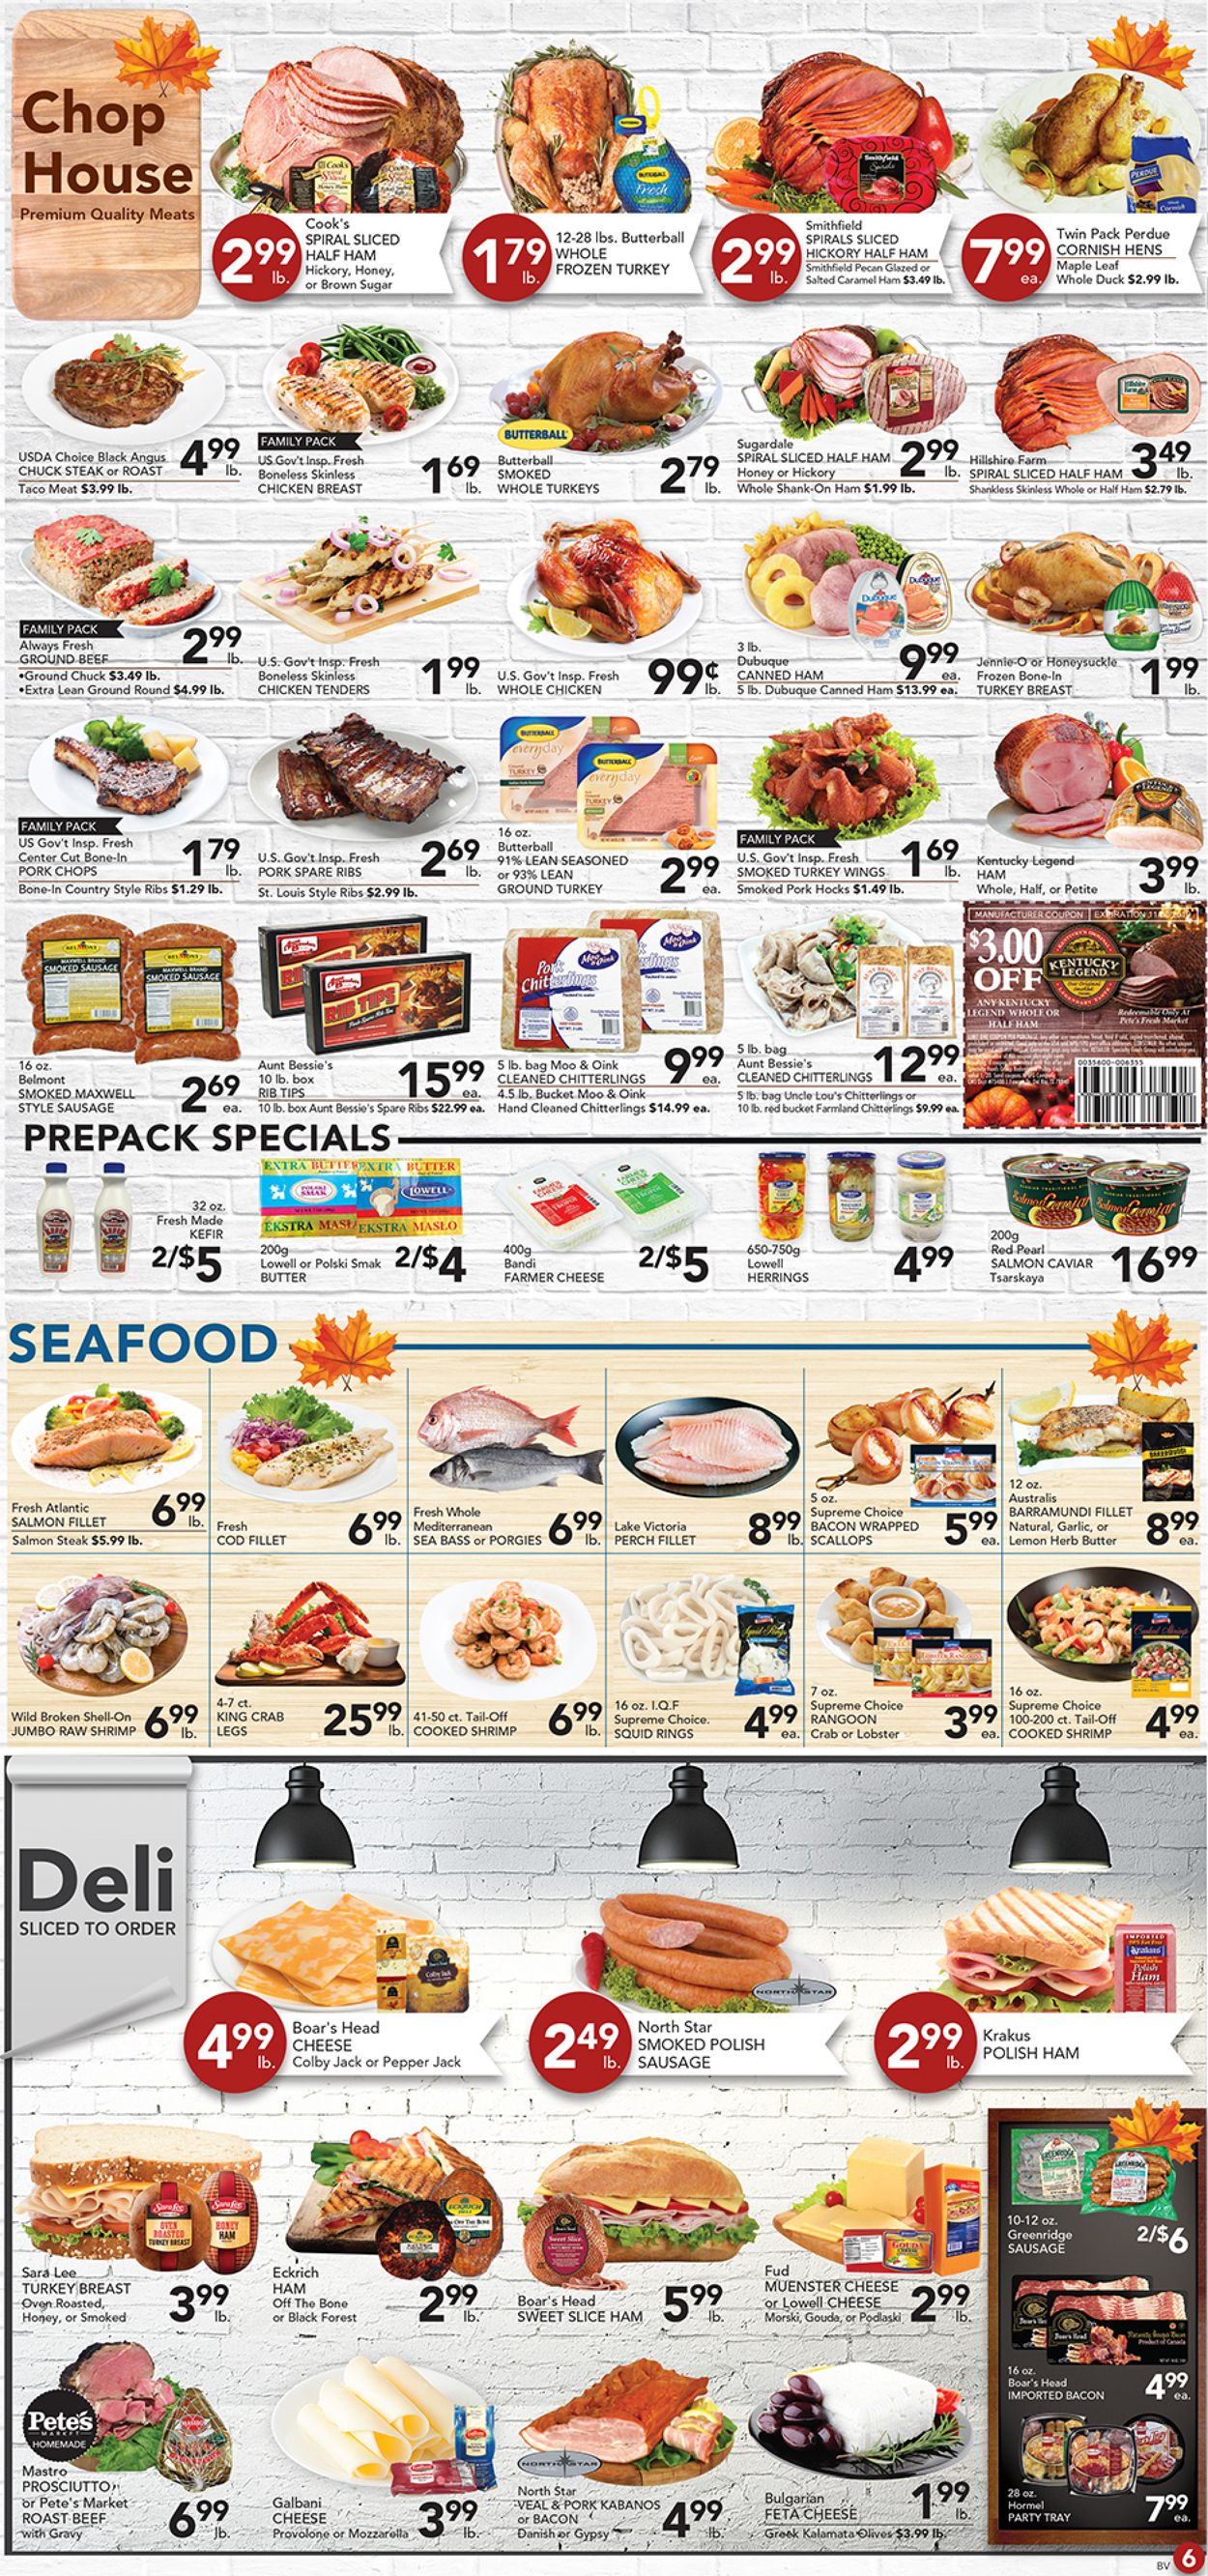 Pete's Fresh Market - Thanksgiving Ad 2019 Weekly Ad Circular - valid 11/20-11/28/2019 (Page 6)